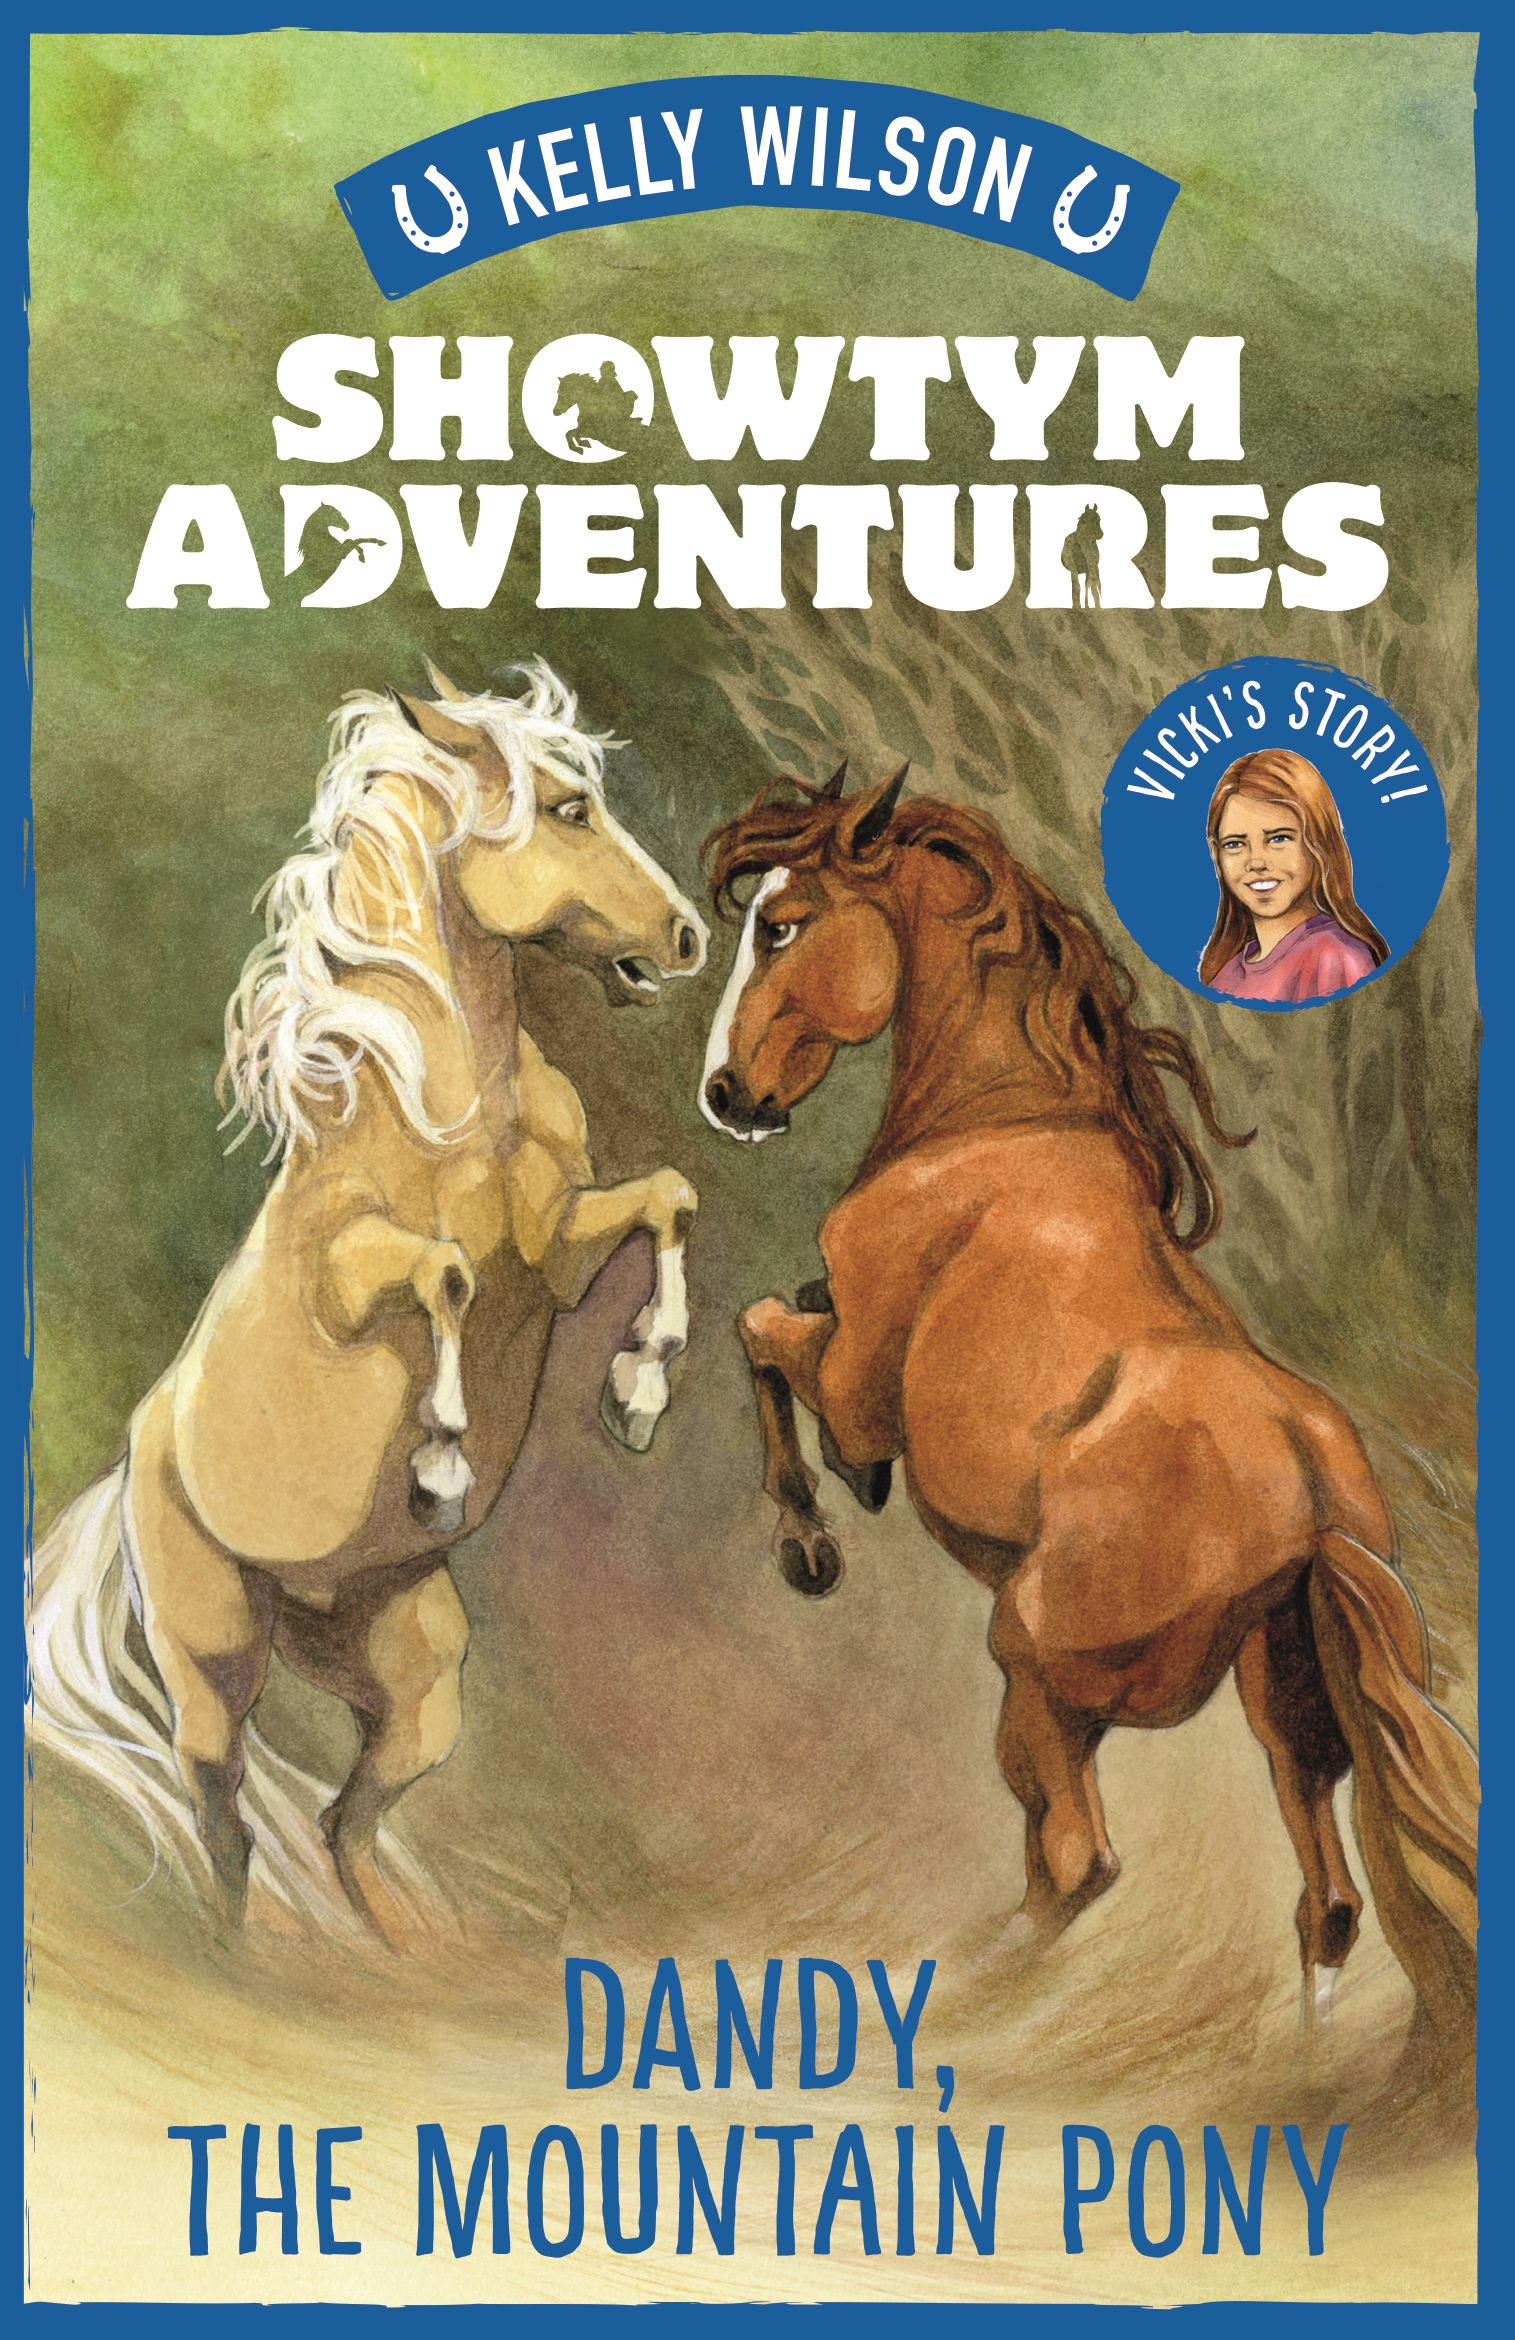 Showtym Adventures 4: Chessy, the Welsh Pony by Kelly 